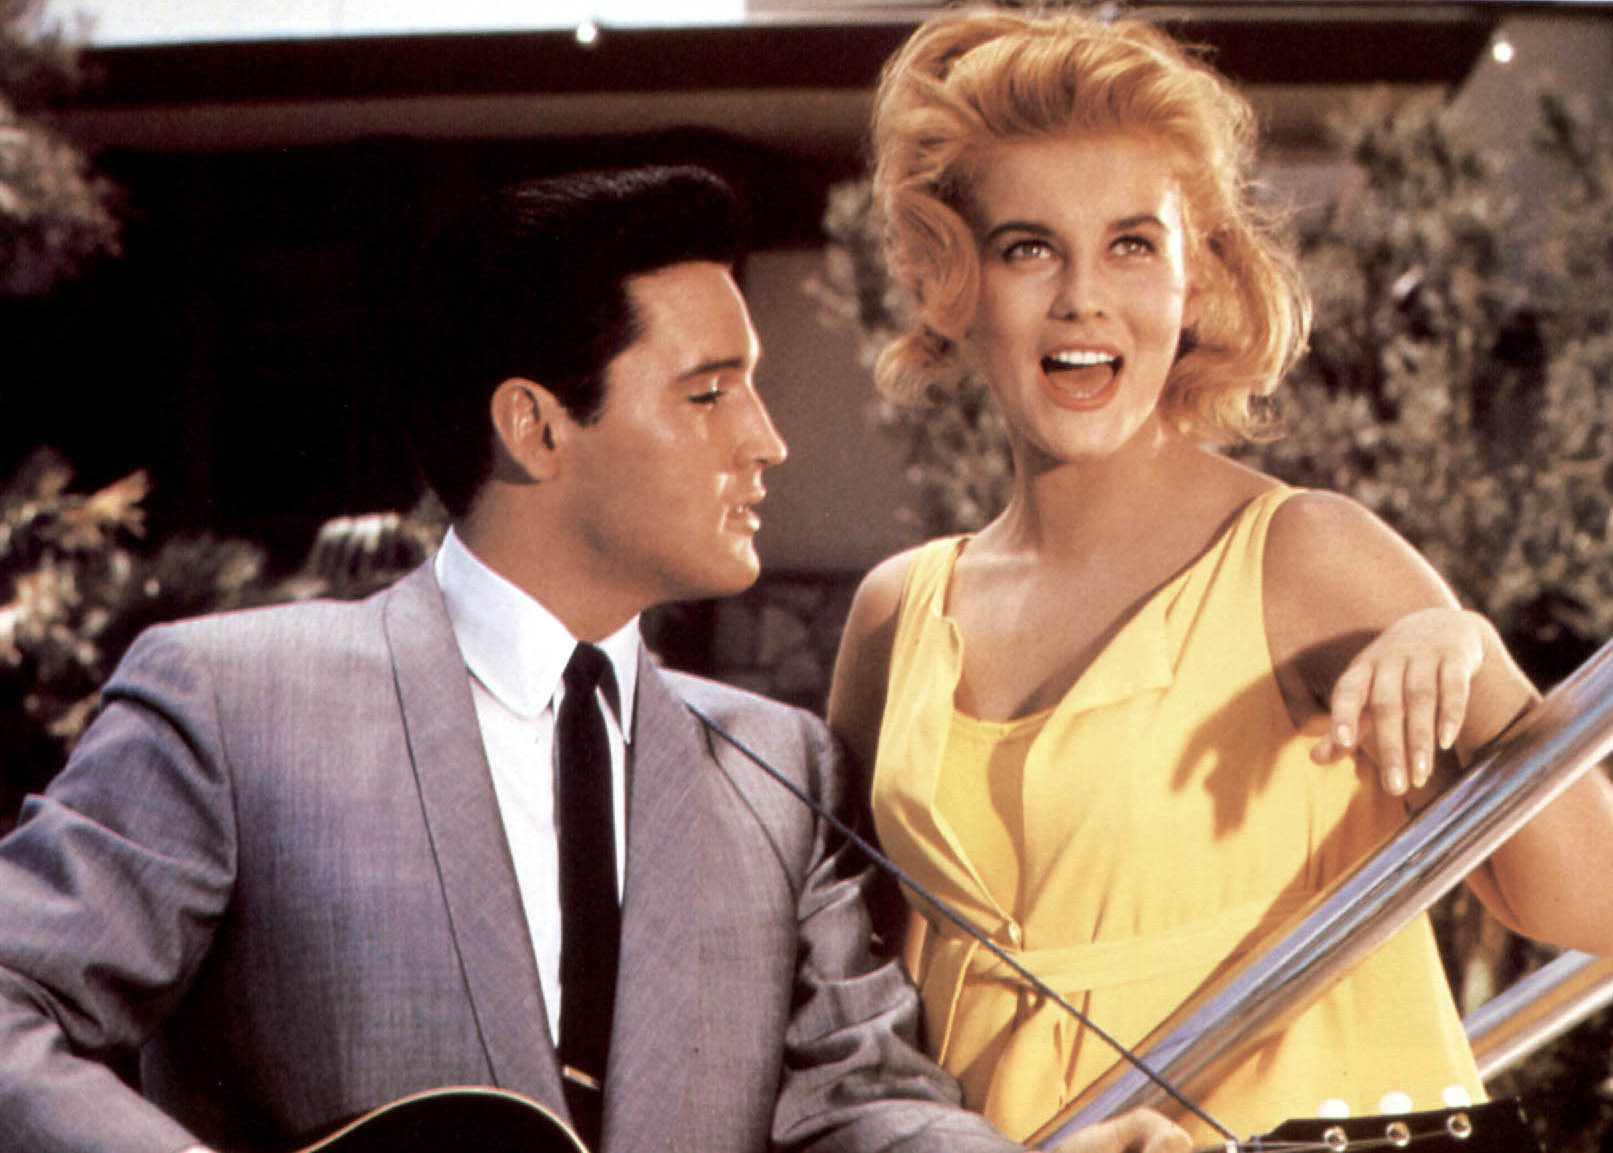 Elvis Presley holding a guitar and standing next to Ann-Margret